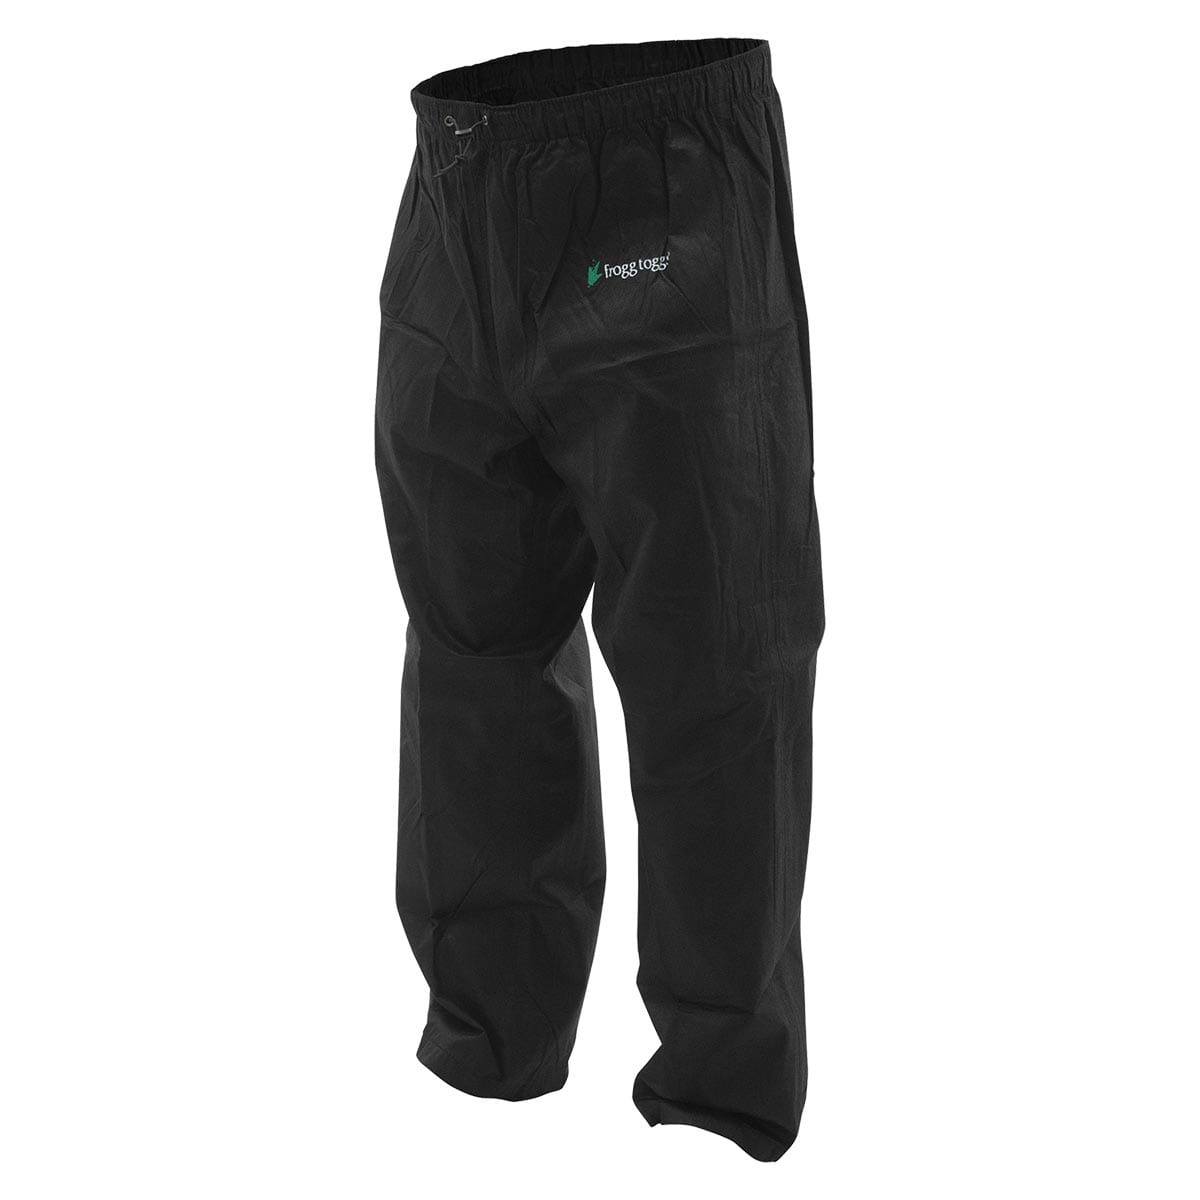 Frogg Toggs Women's Classic Pro Action Pant, Black